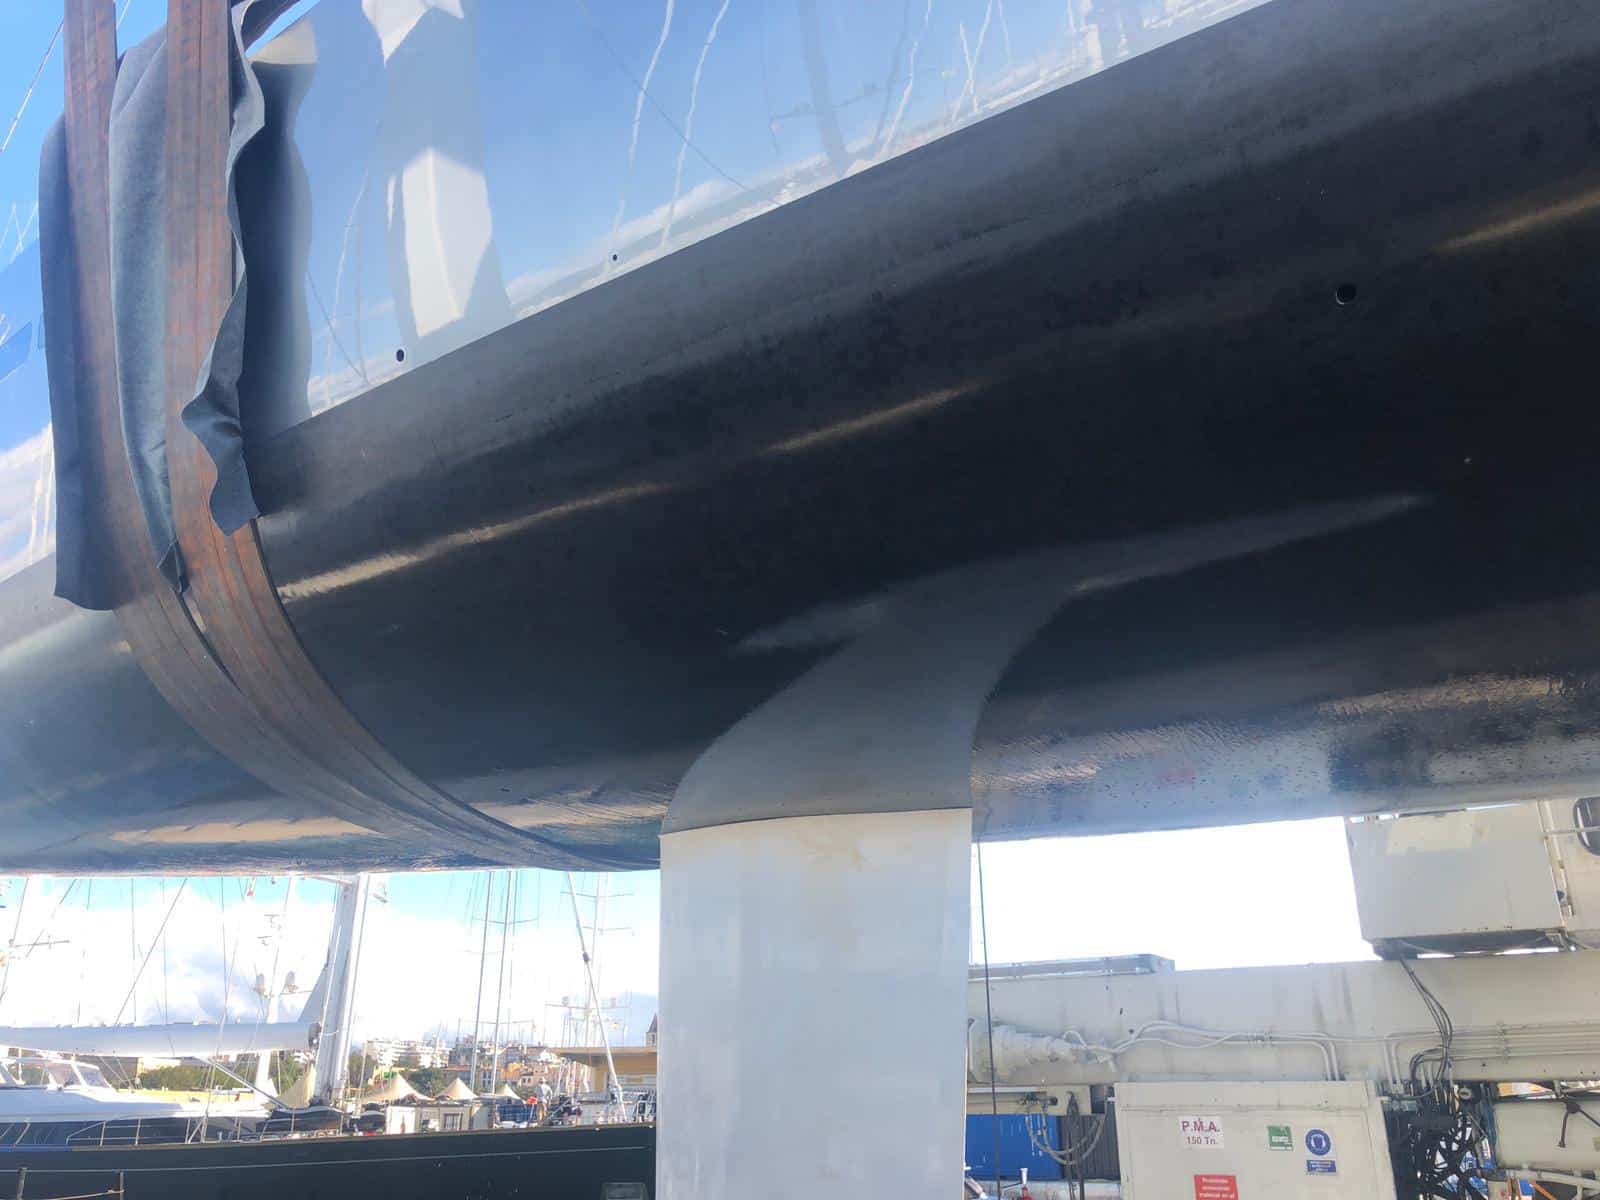 close up of yacht hull coated in black